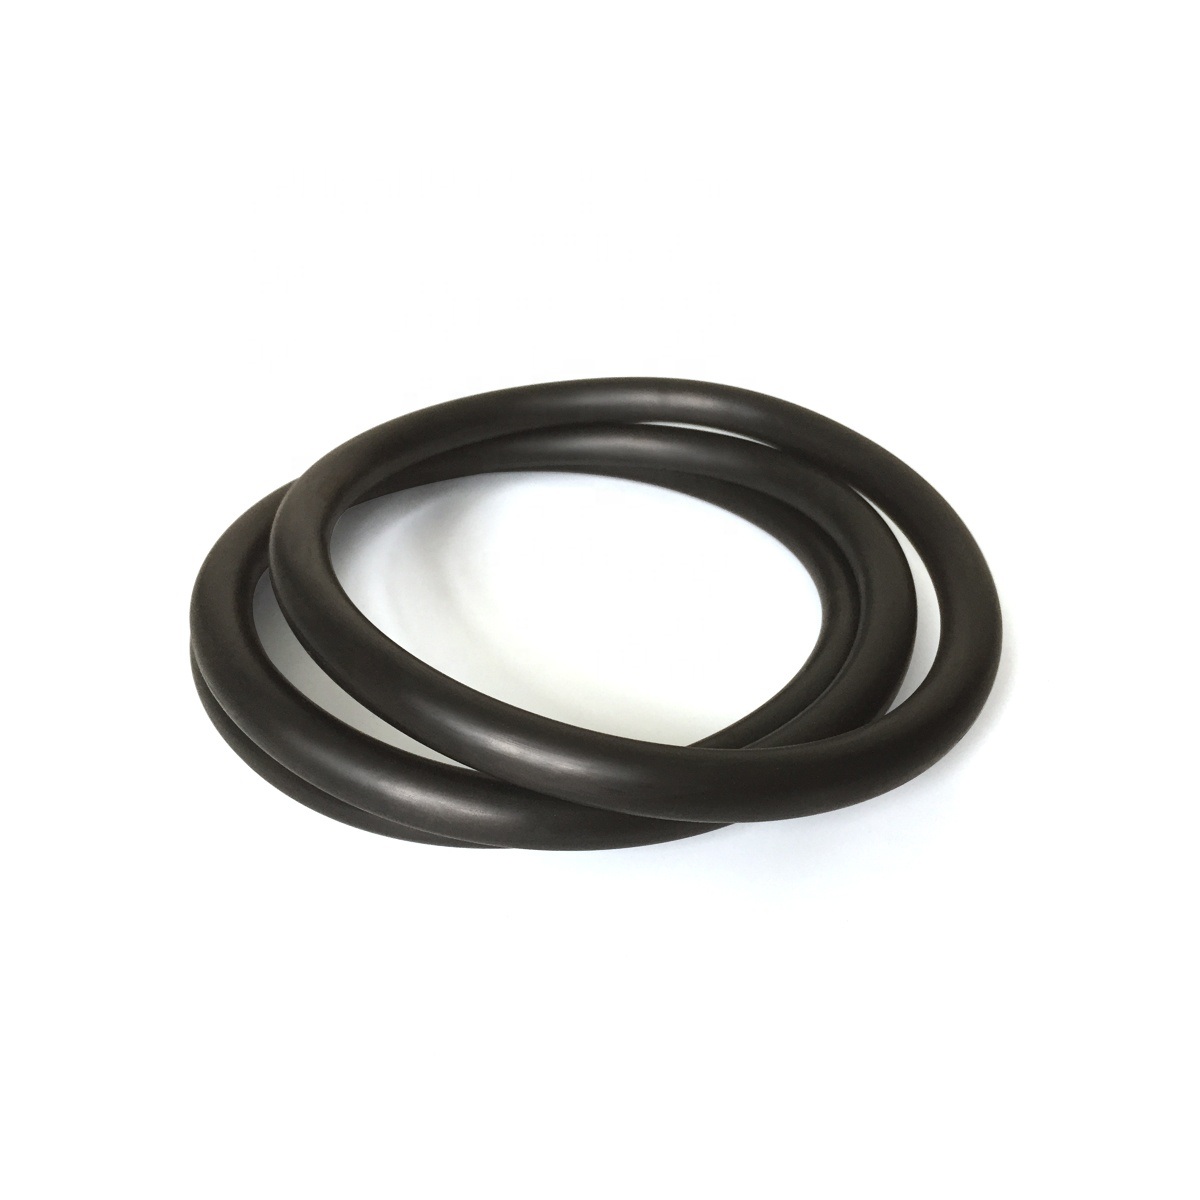 National Heat Resistant Ffkm Rubber O Rings NBR O-Ring PTFE FKM Oil Seals